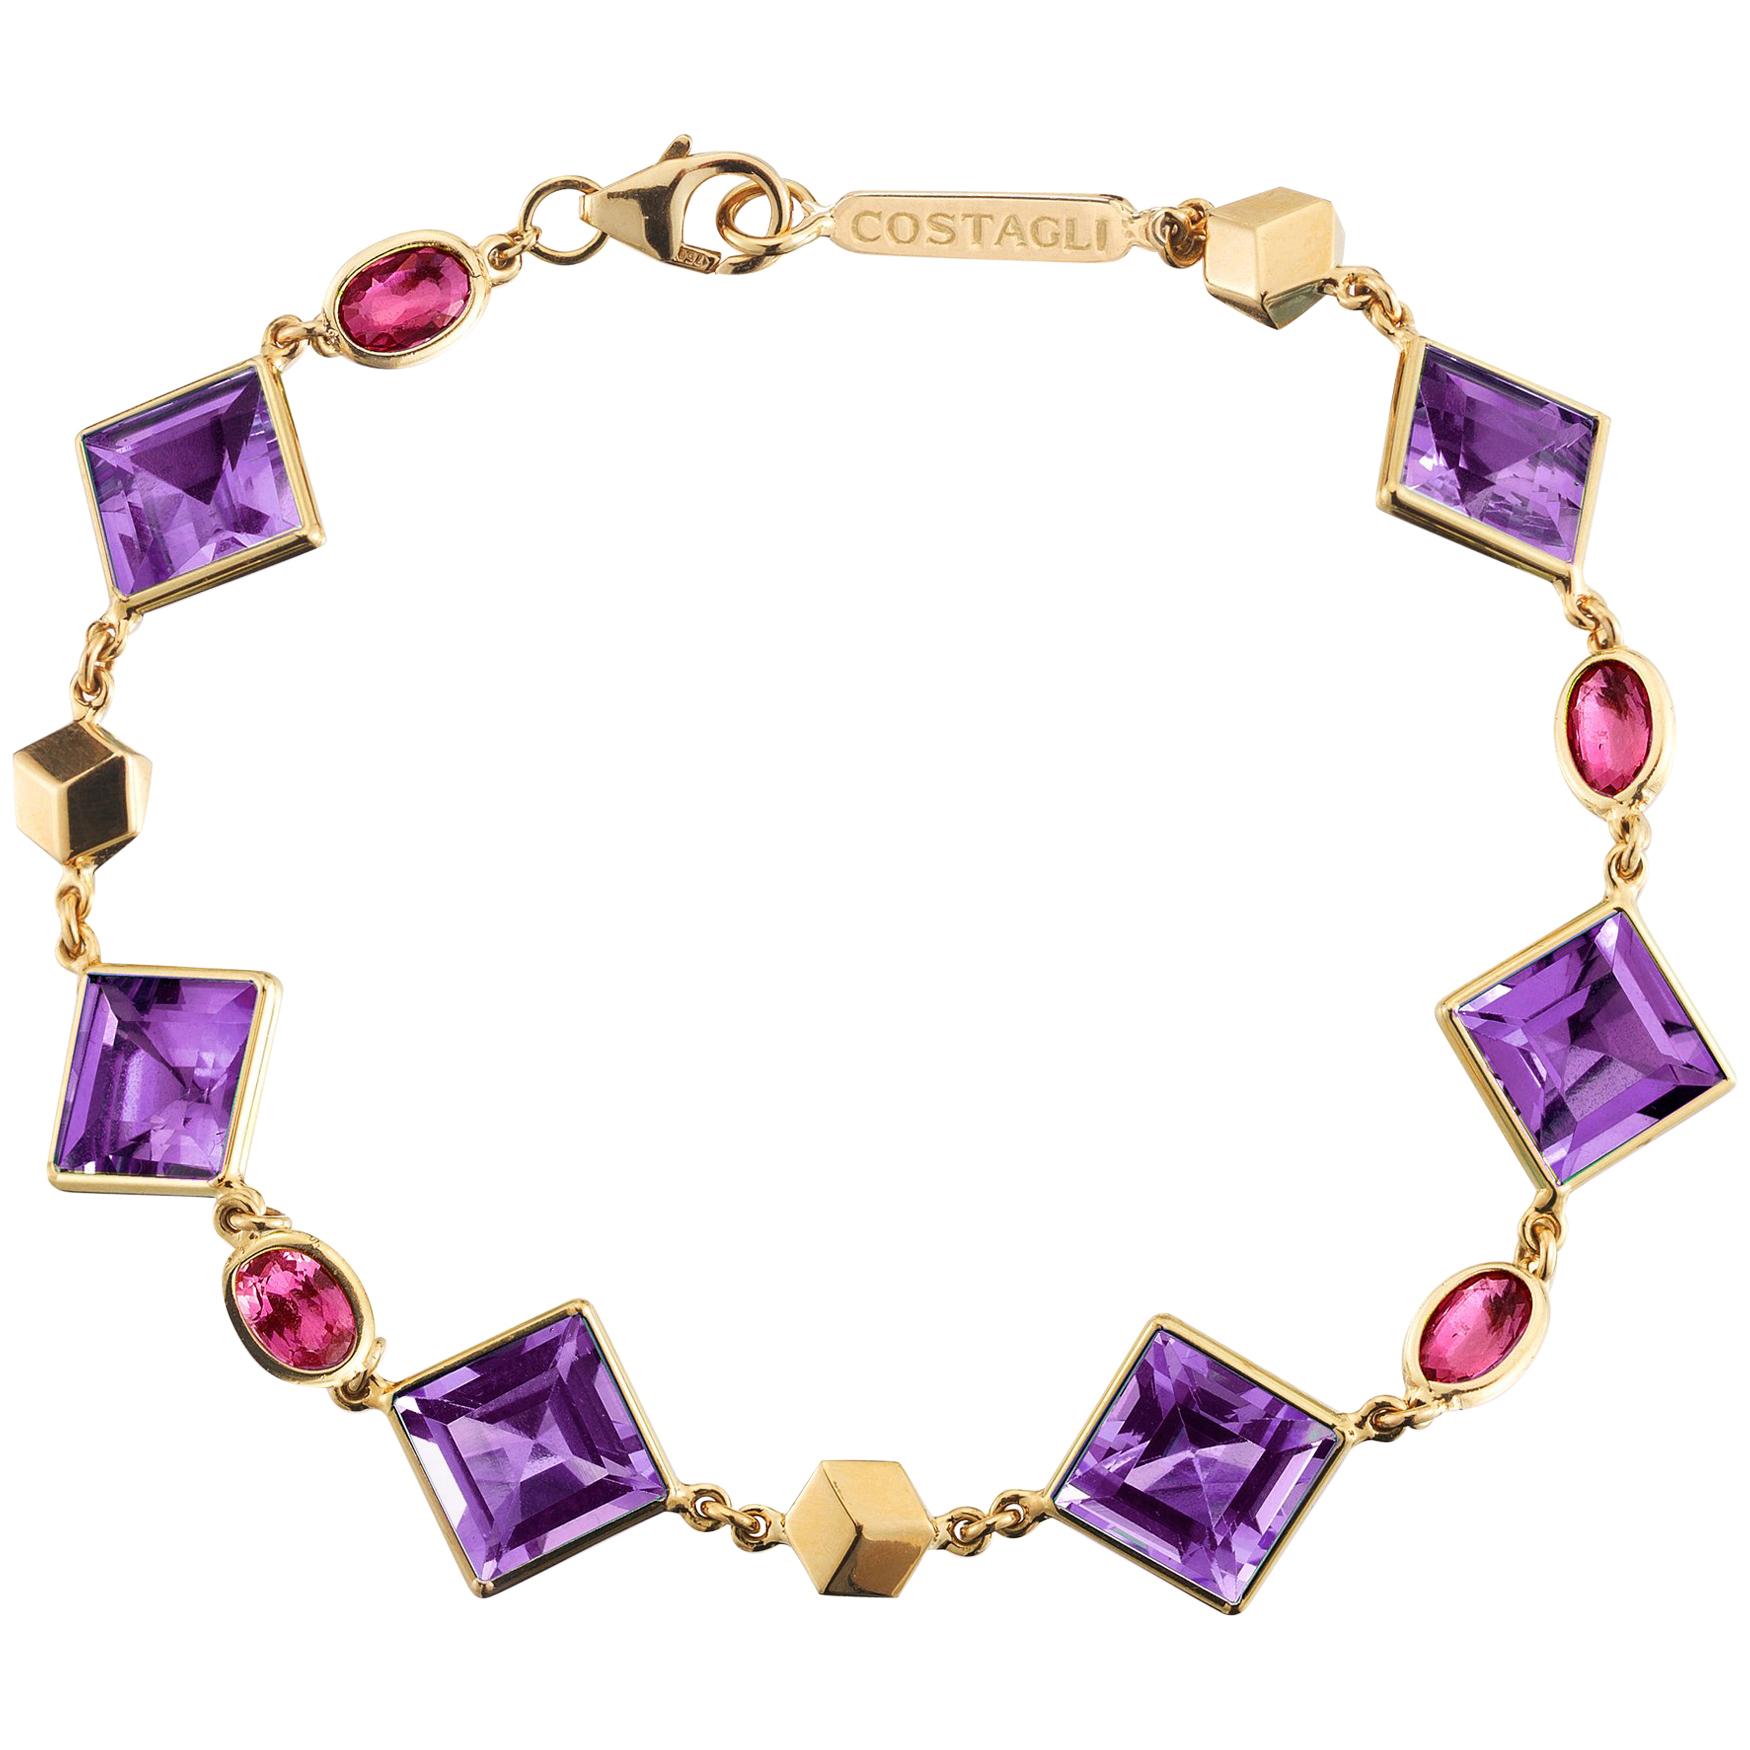 Paolo Costagli 18 Karat Yellow Gold Florentine Bracelet with Amethyst and Rubies For Sale